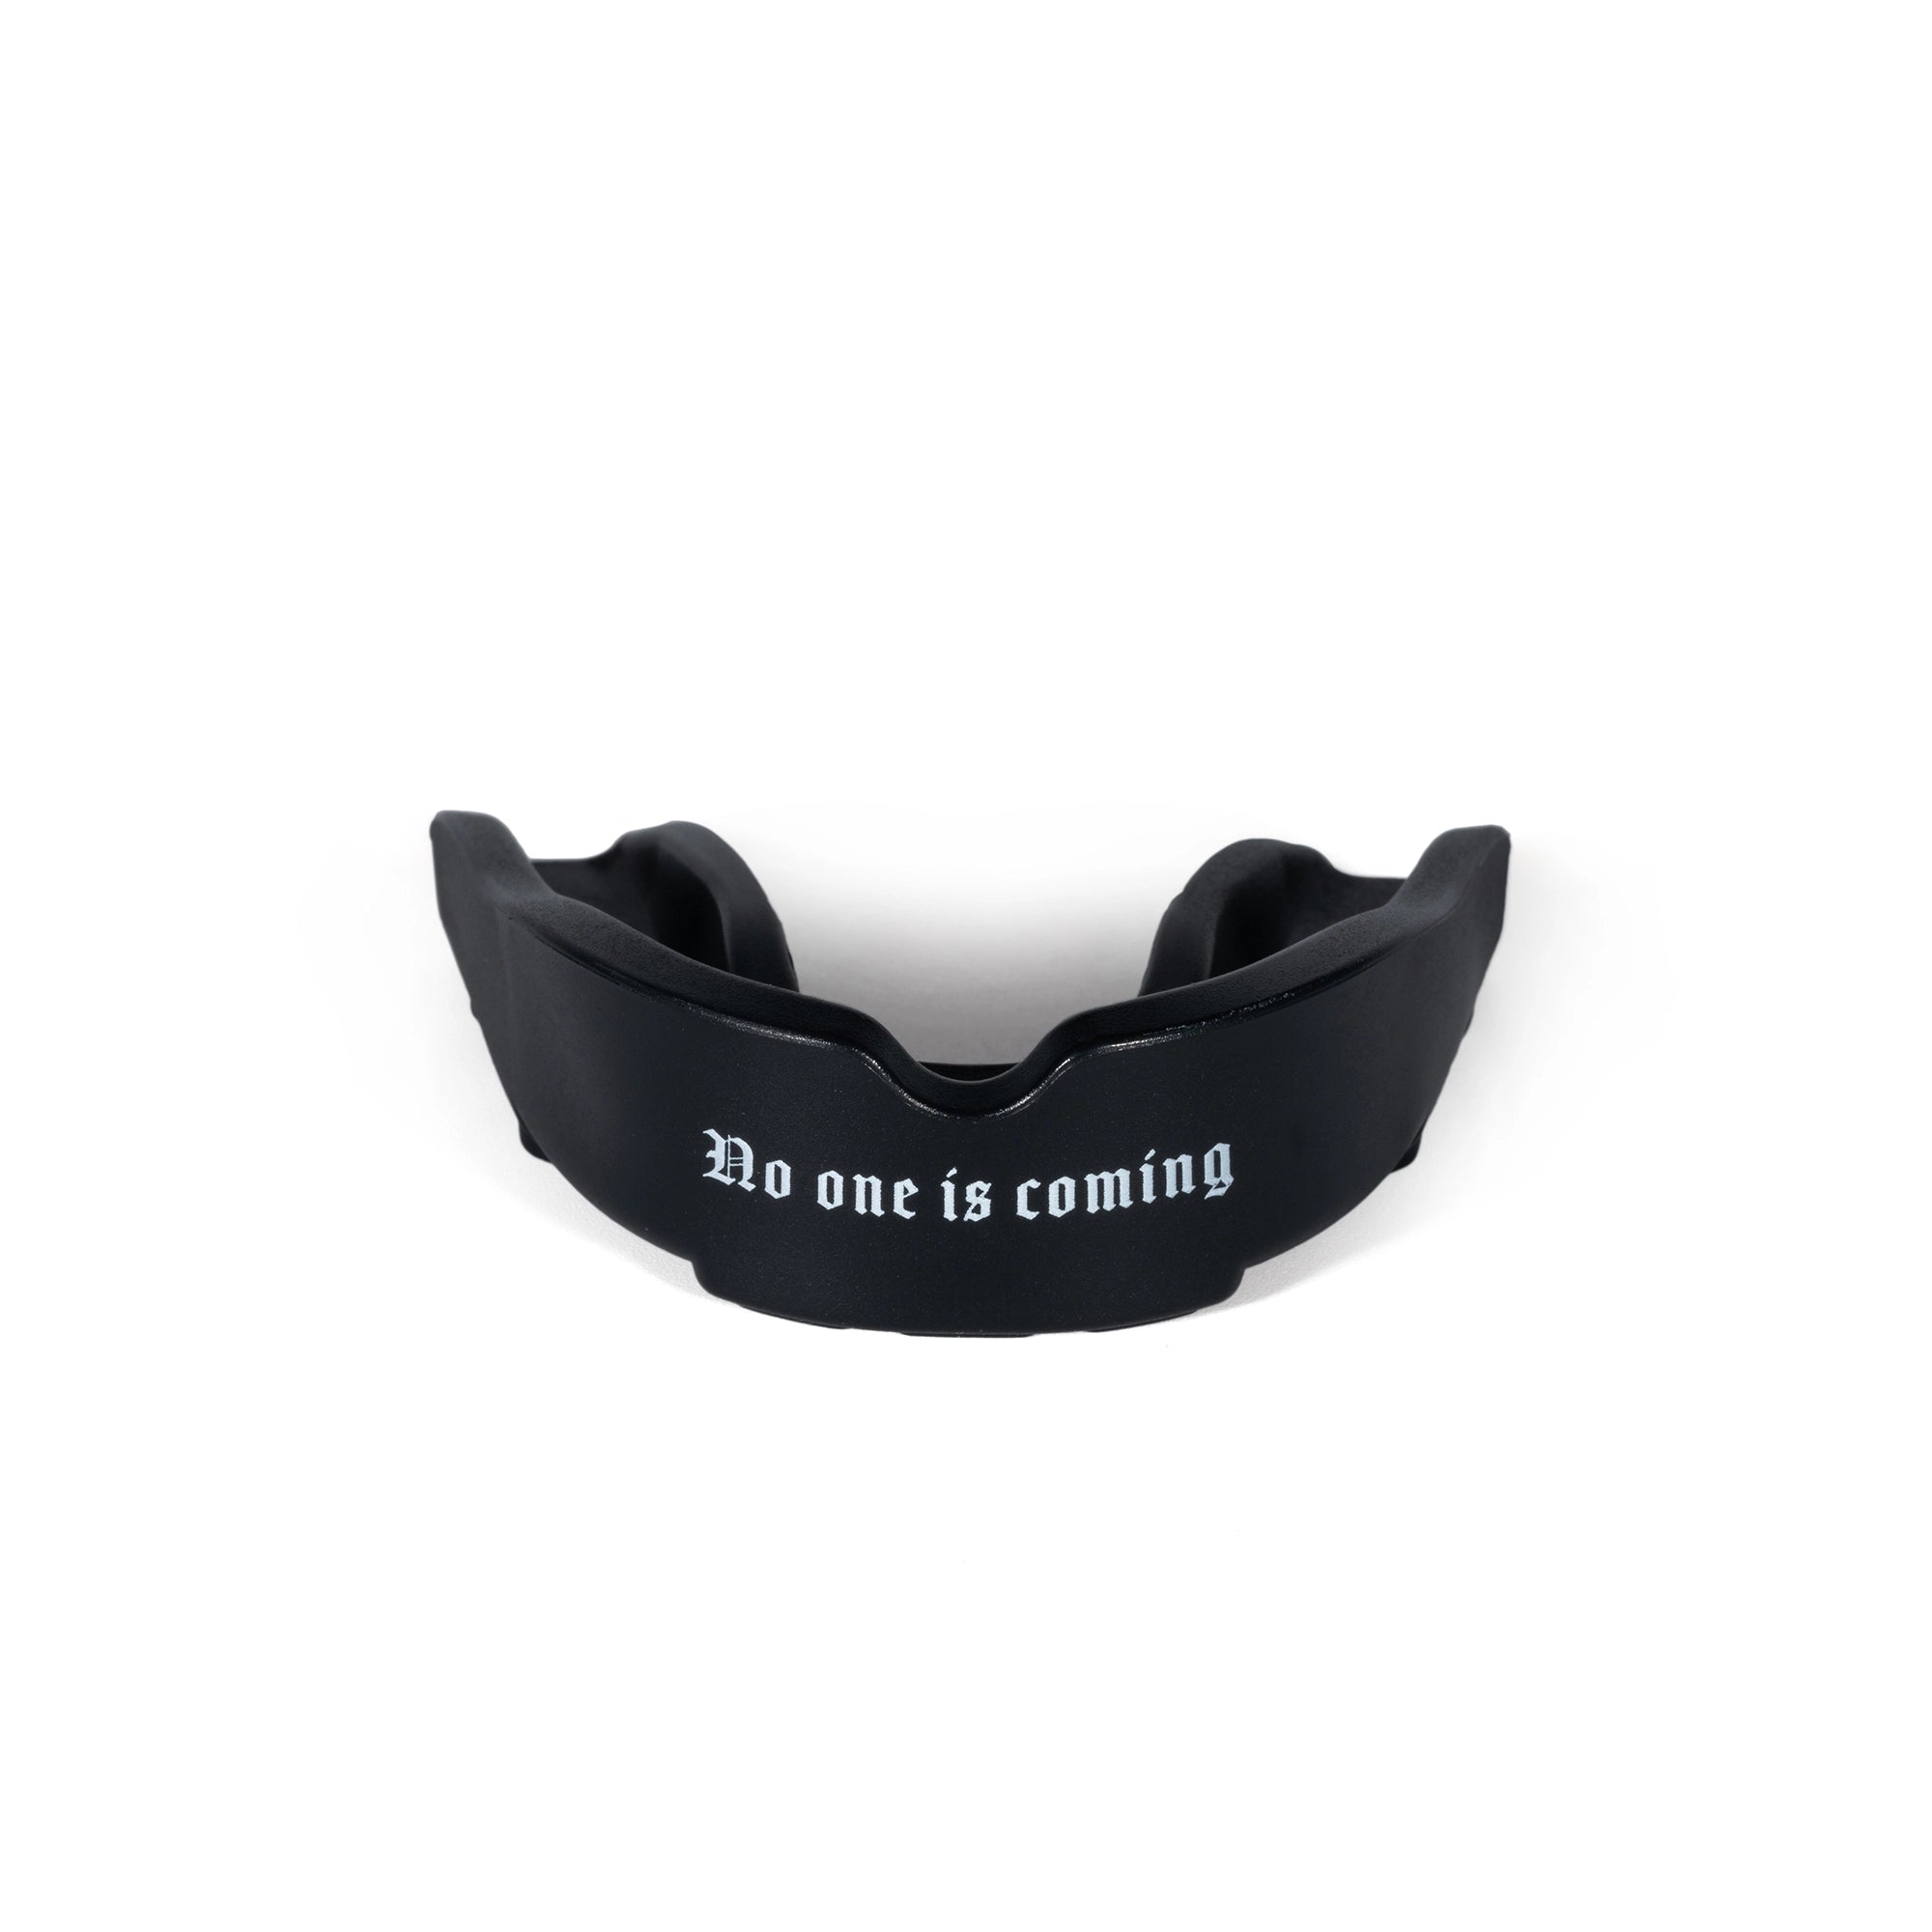 Full Contact Mouth Guard